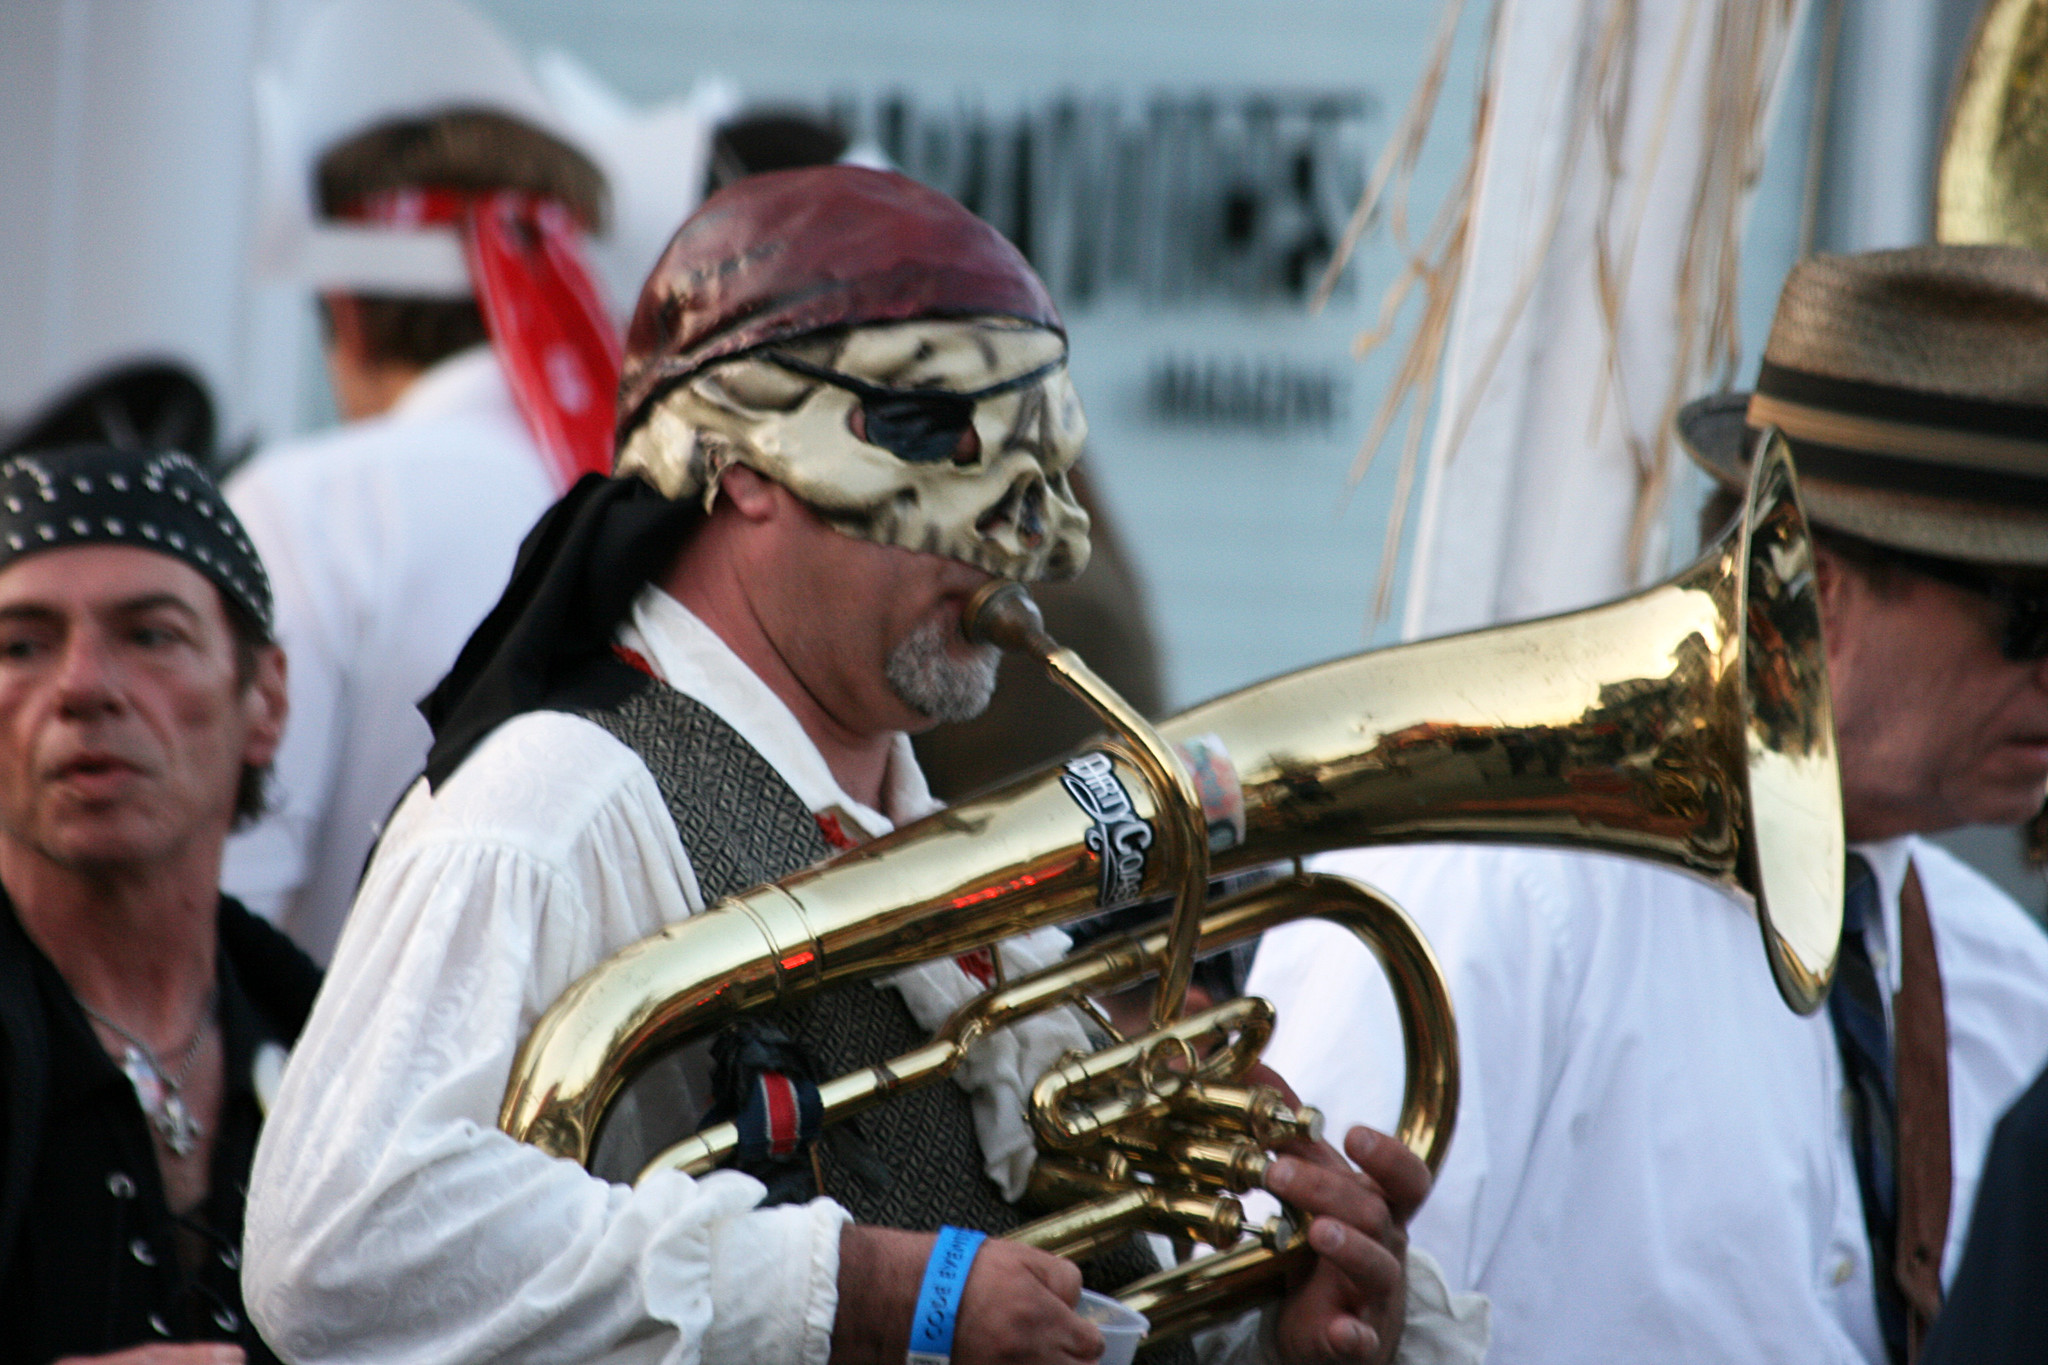 The best festivals in New Orleans & Louisiana